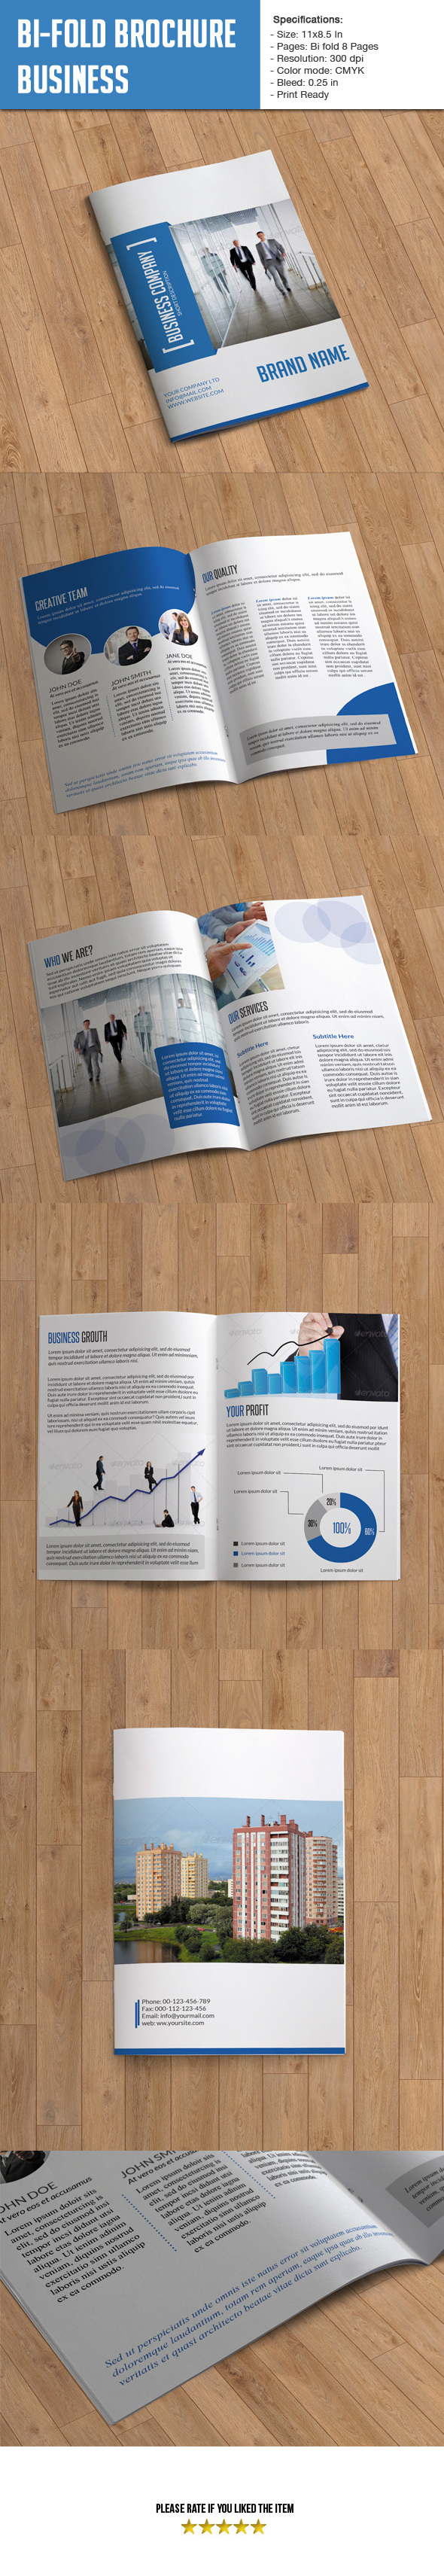 Bifold Brochure for Business- 8 Pages